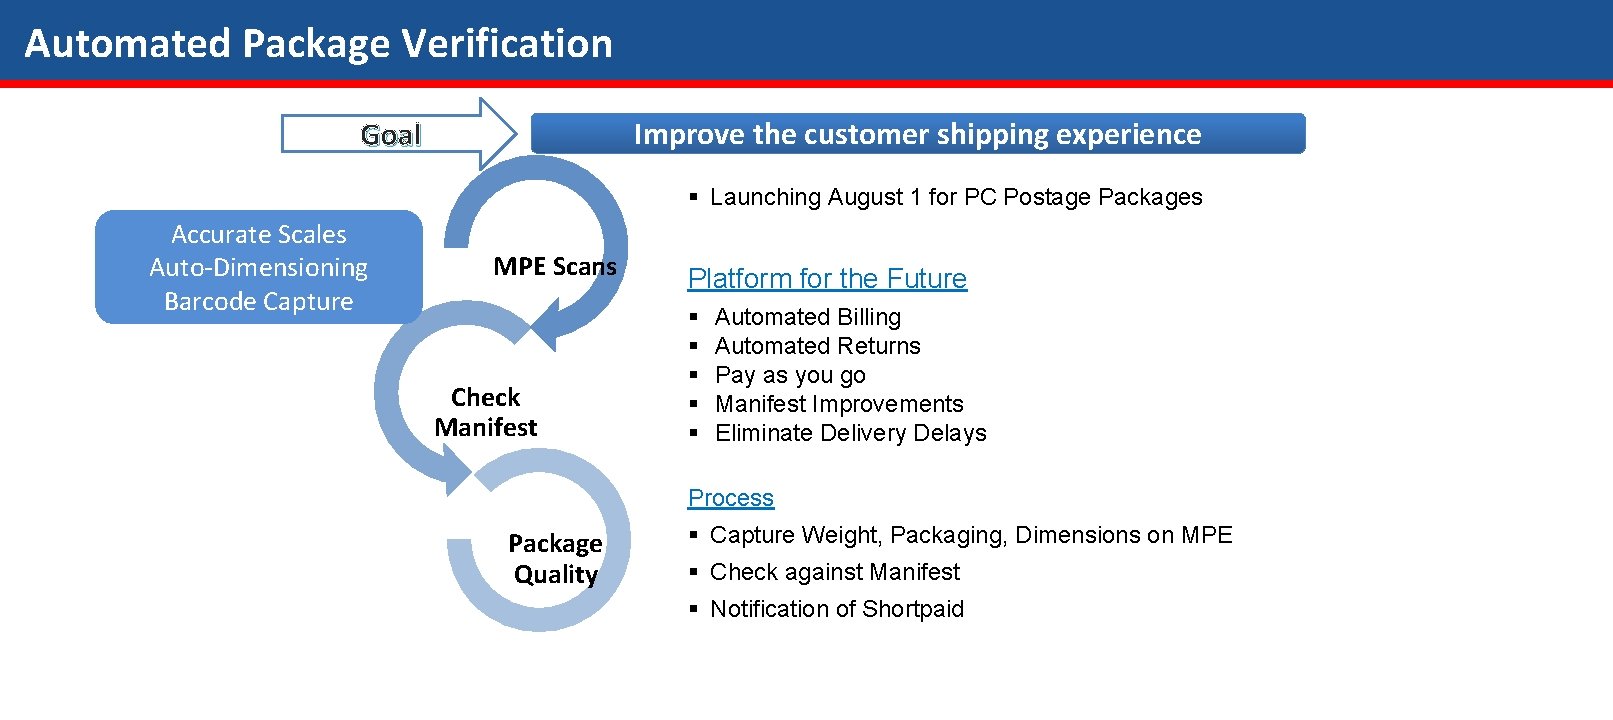 Automated Package Verification Improve the customer shipping experience Goal § Launching August 1 for